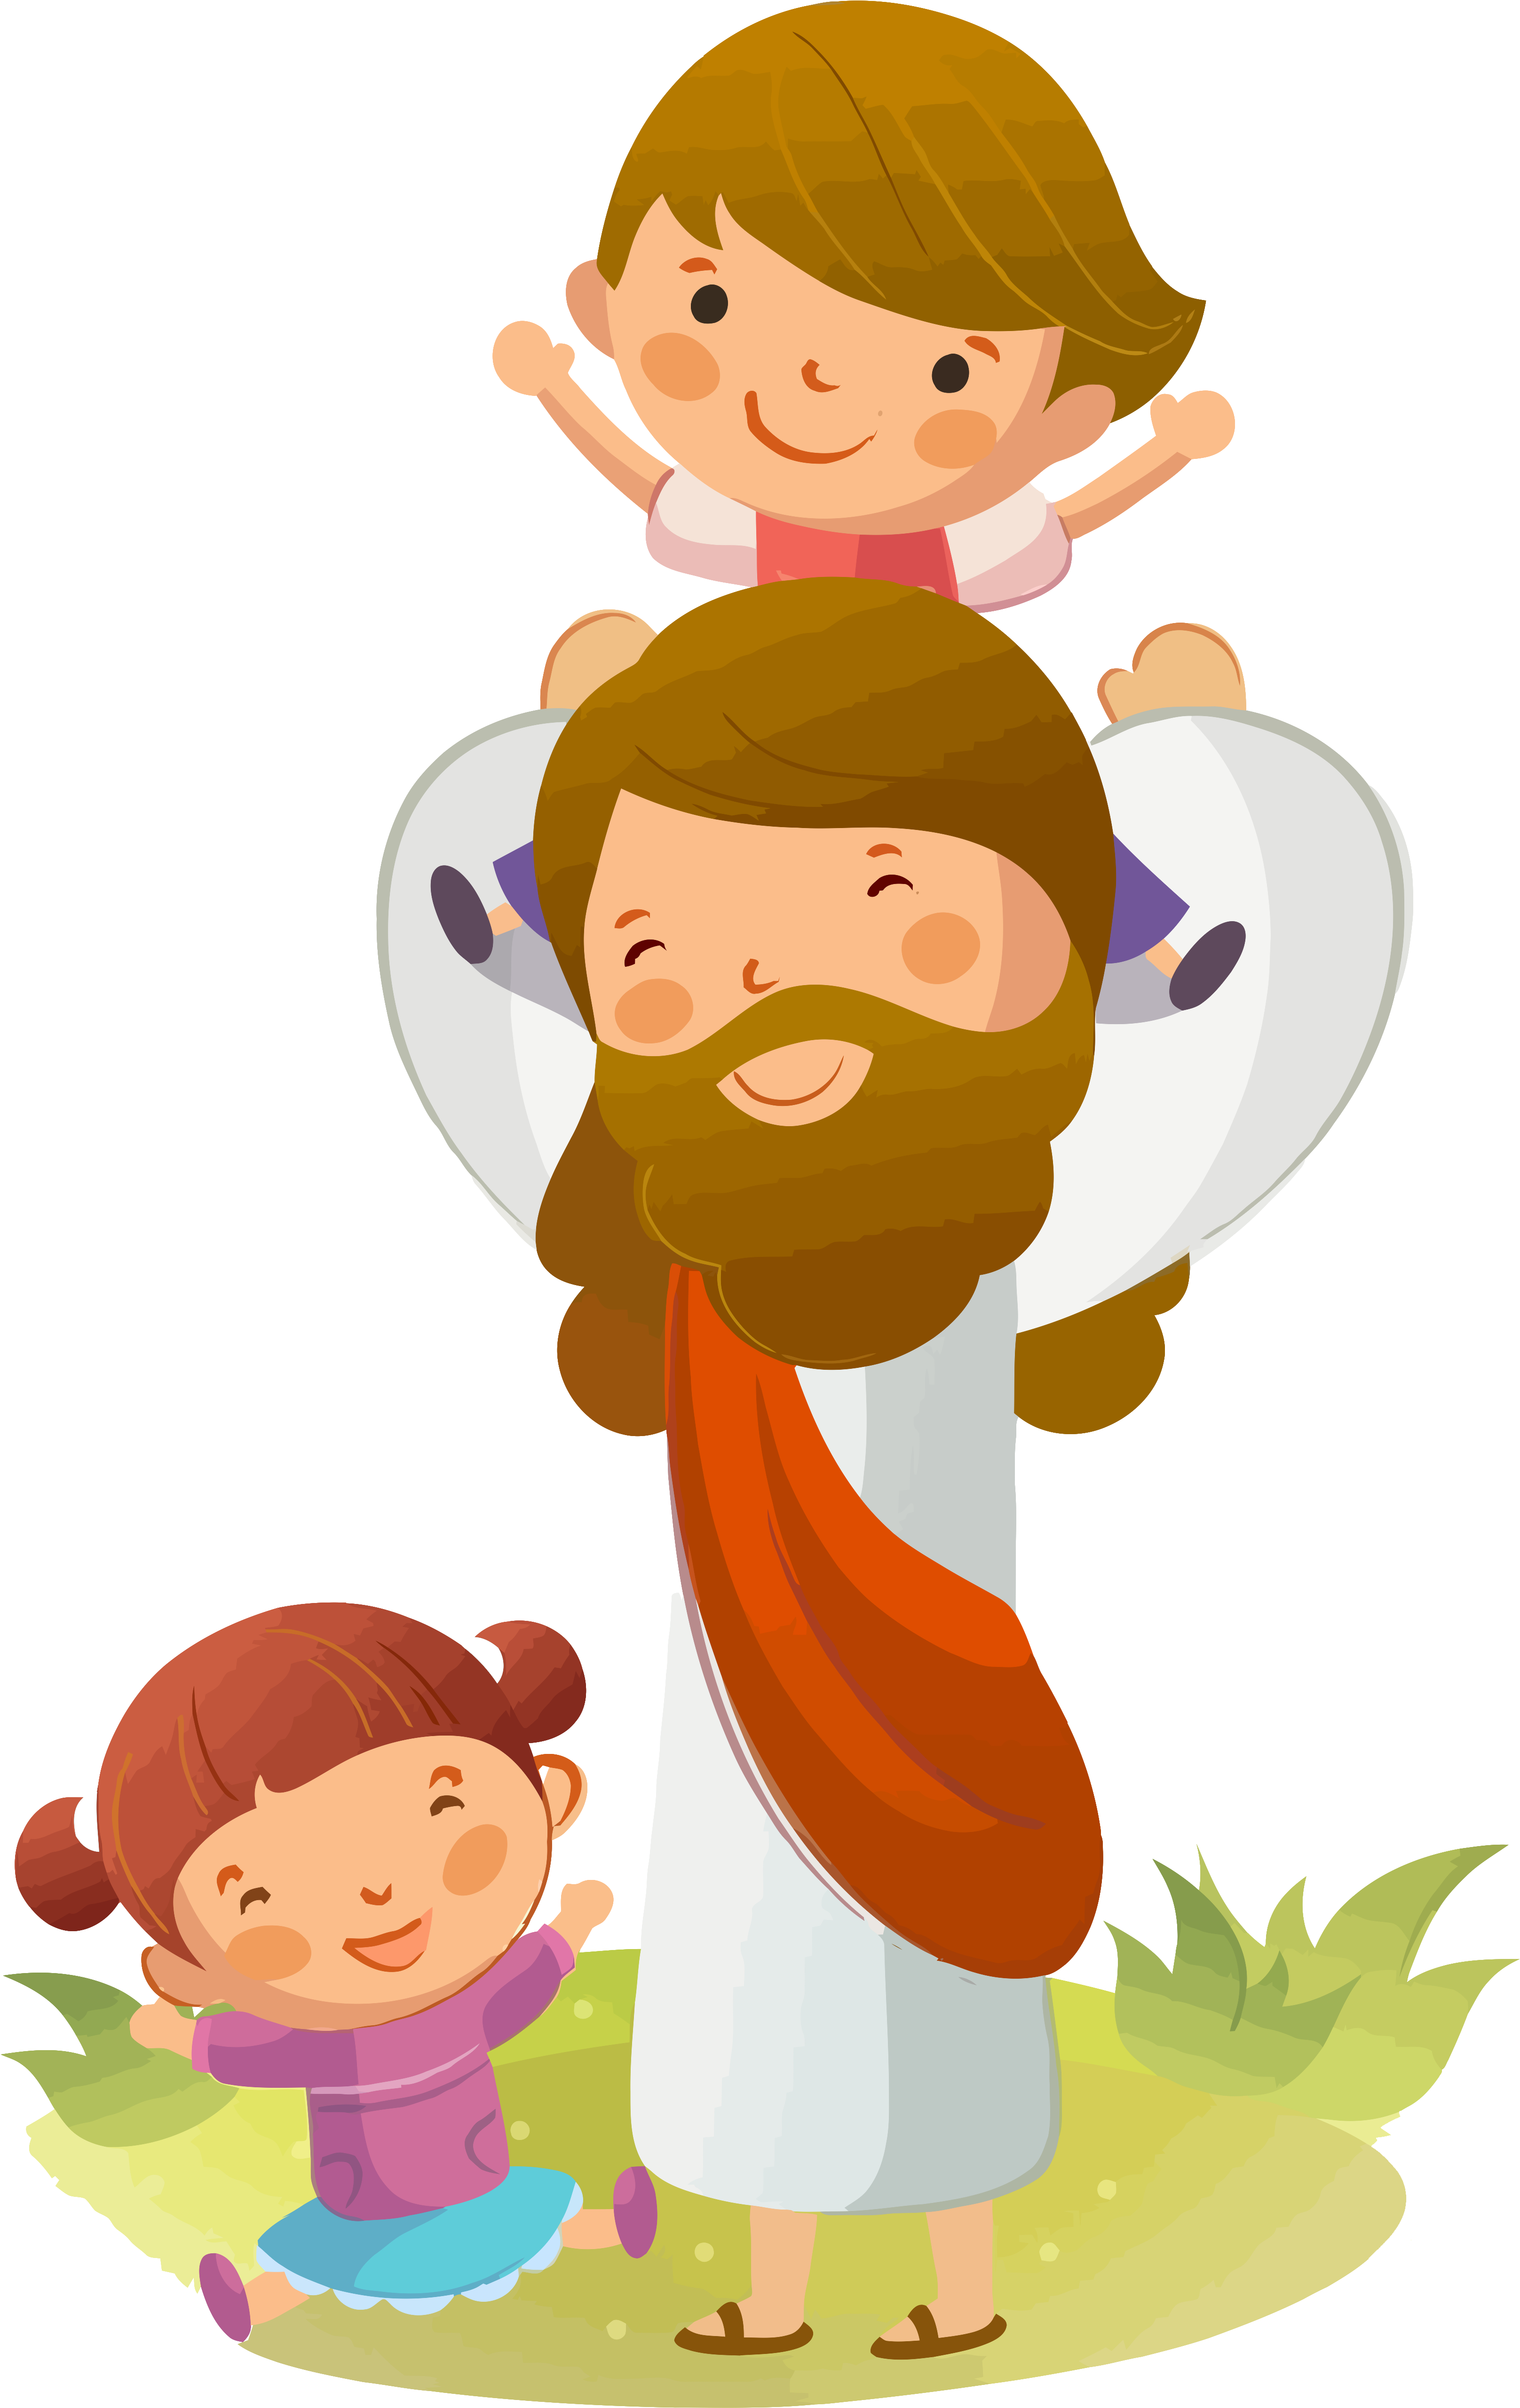 Jesus Vector59 By Minayoussefsaleb Jesus Vector59 By - Preparing For First Holy Communion: A Guide (4480x6400)